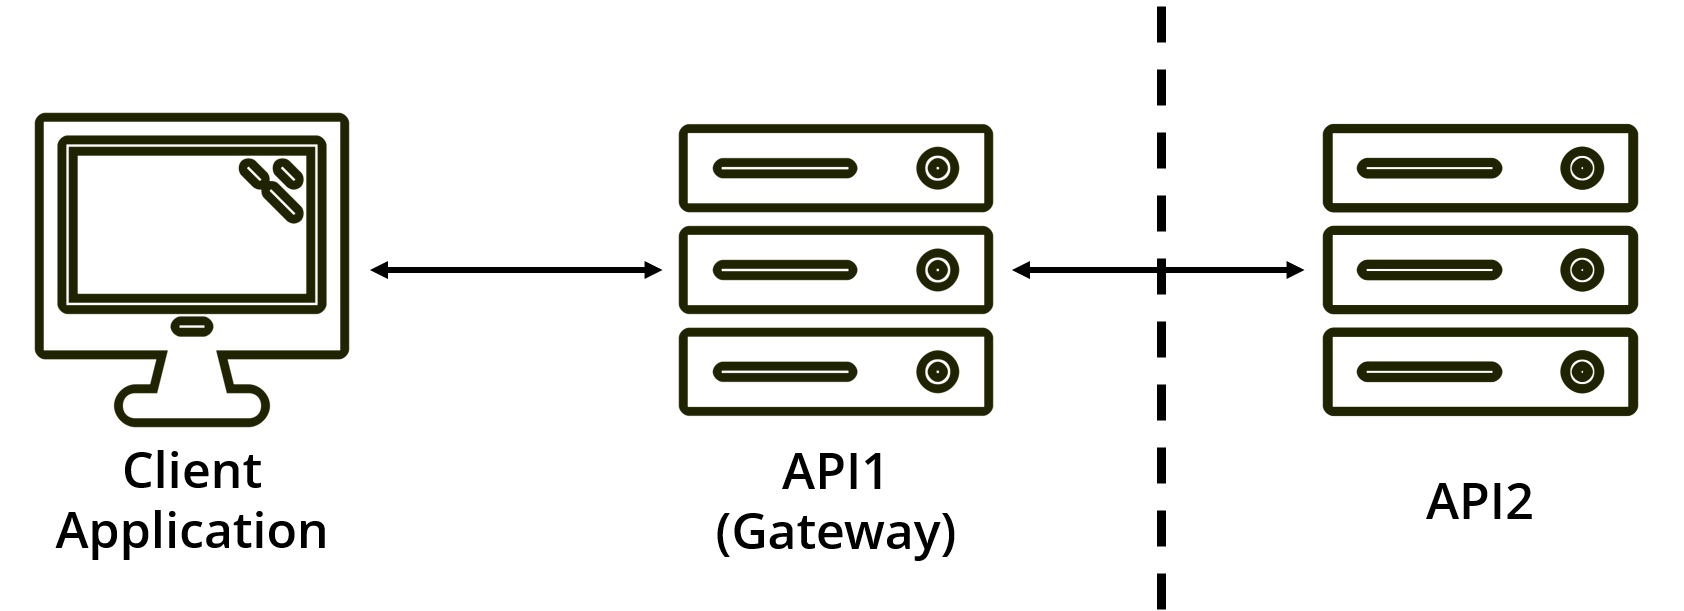 An OAuth client application calling an API Gateway, which in turns calls one other API